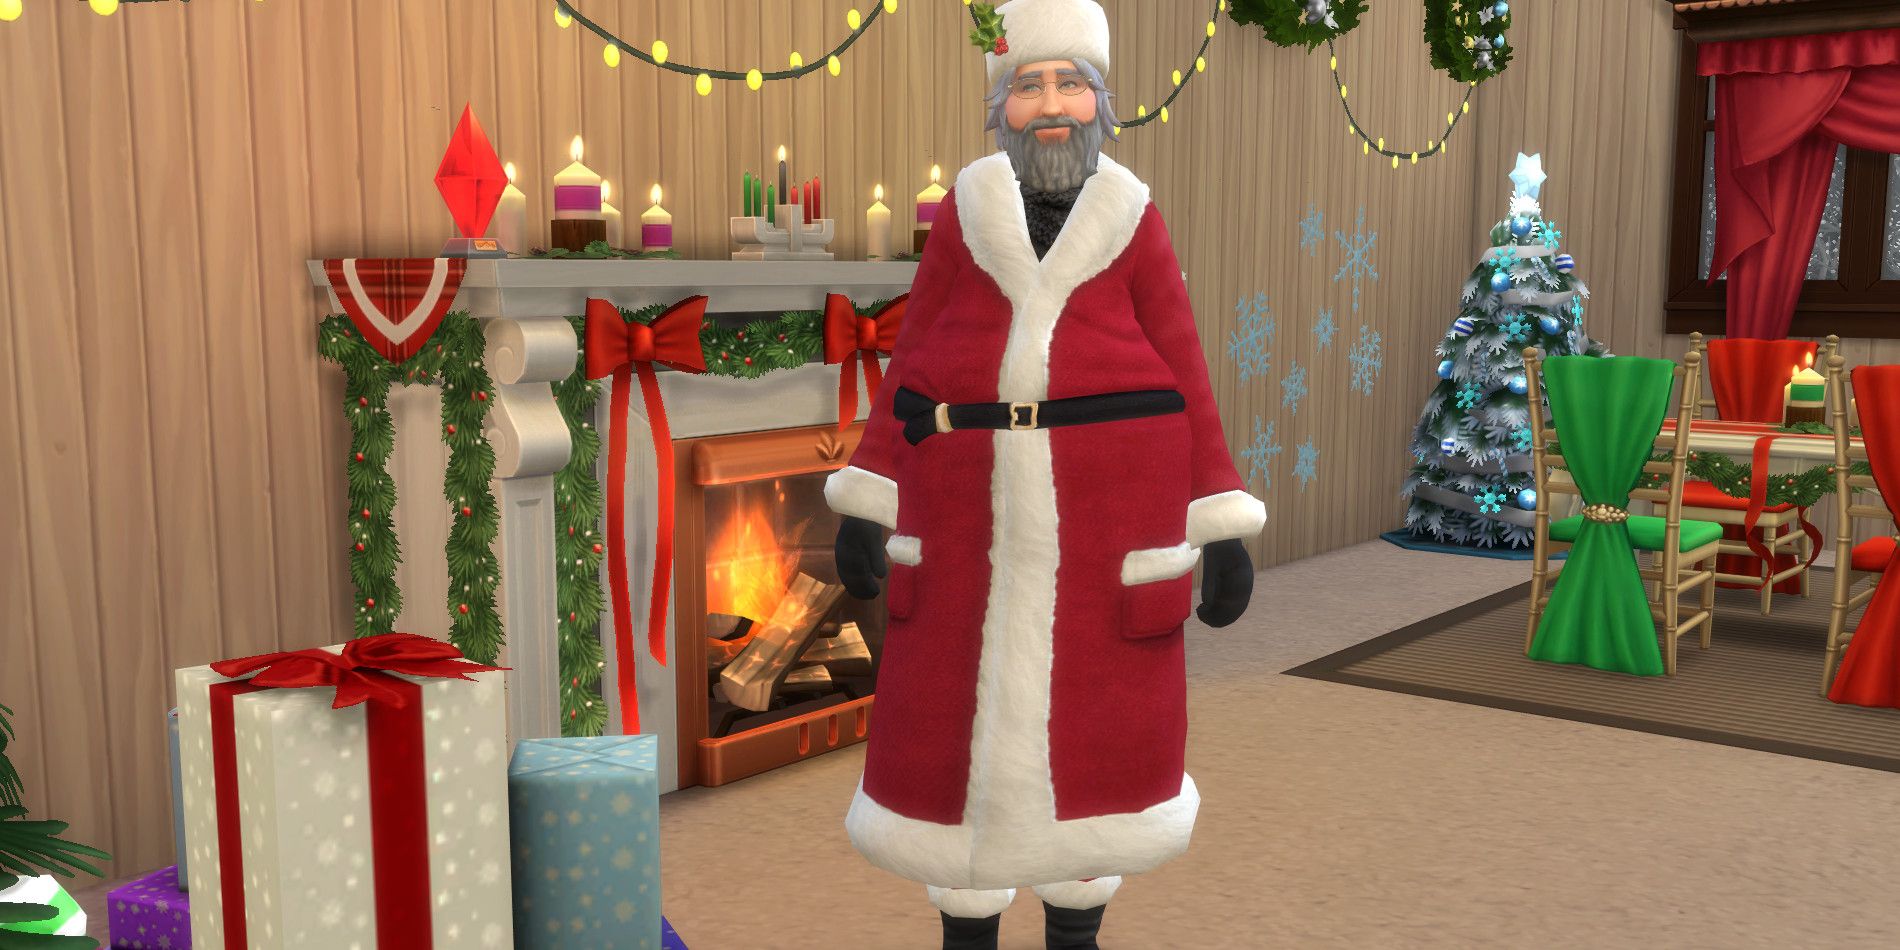 Santa stands in a well-decorated living room in The Sims 4.